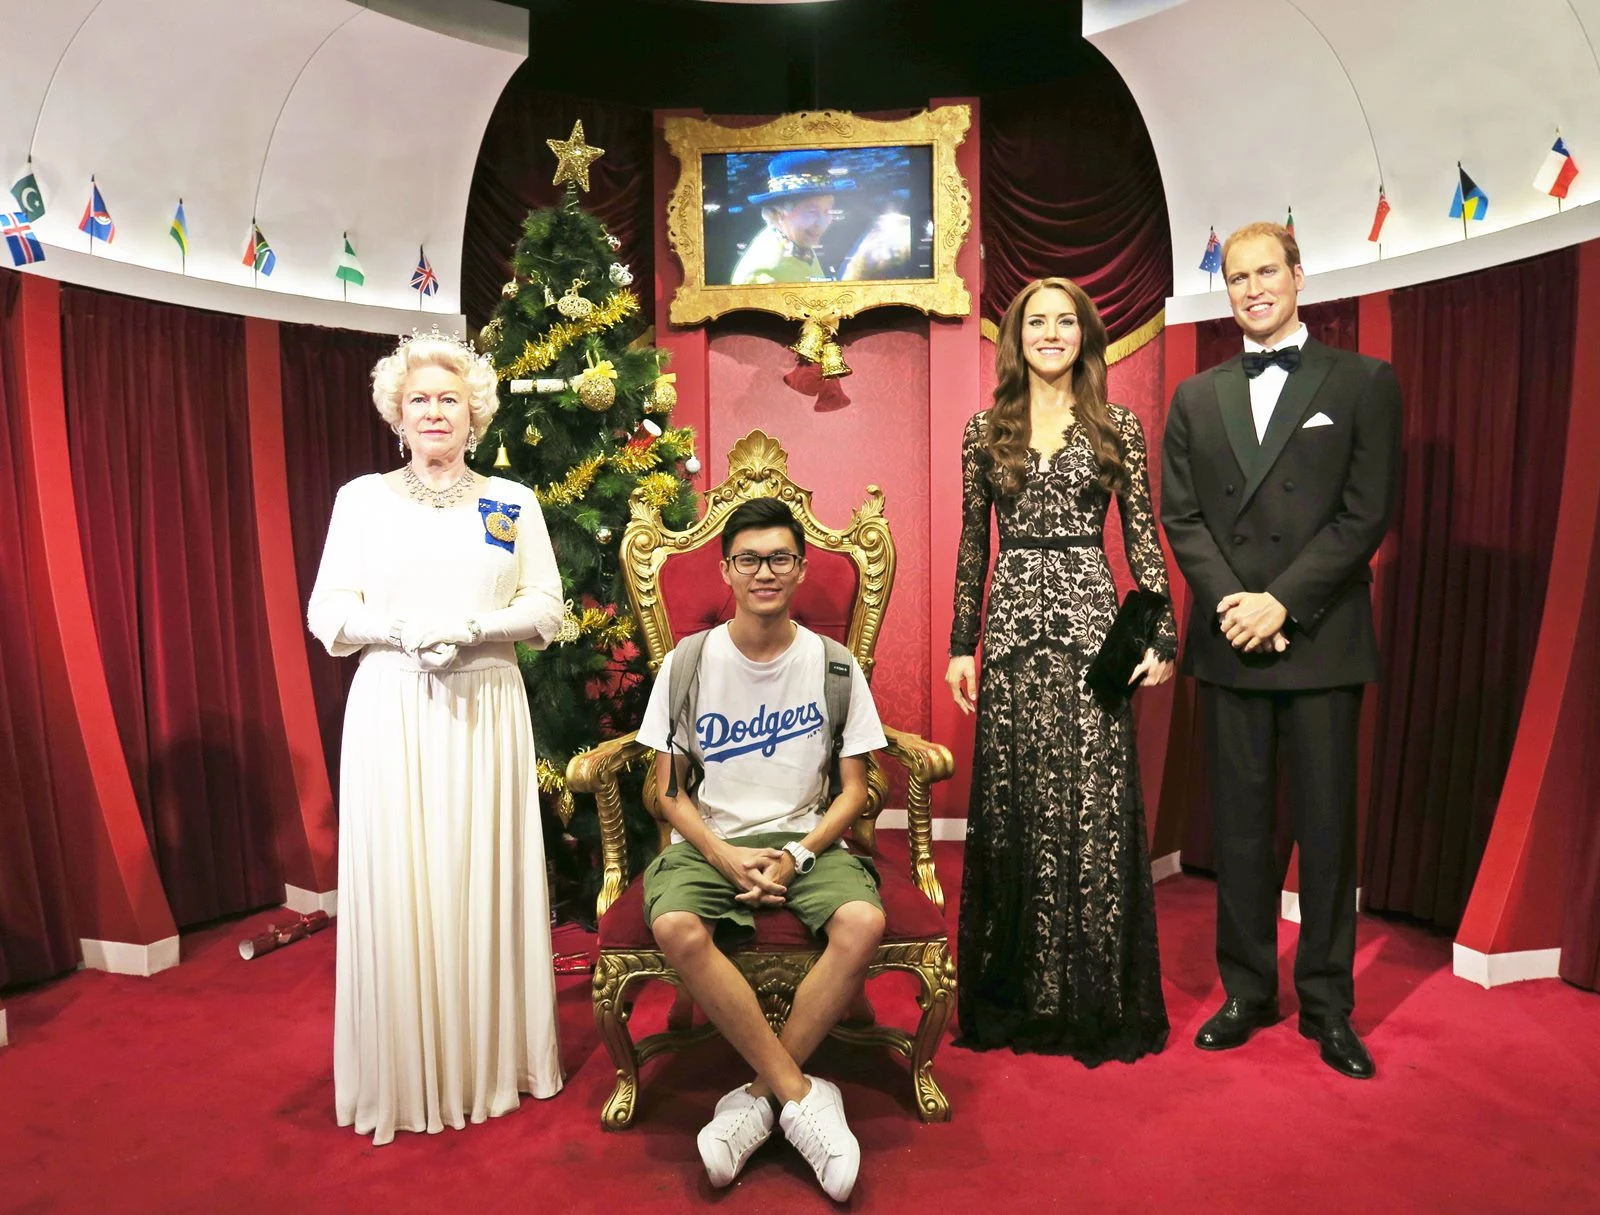 Sydney-Darling-Harbour-Madame-Tussauds-Sydney-best-top-tourist-attractions-things-to-do-travel-Australia